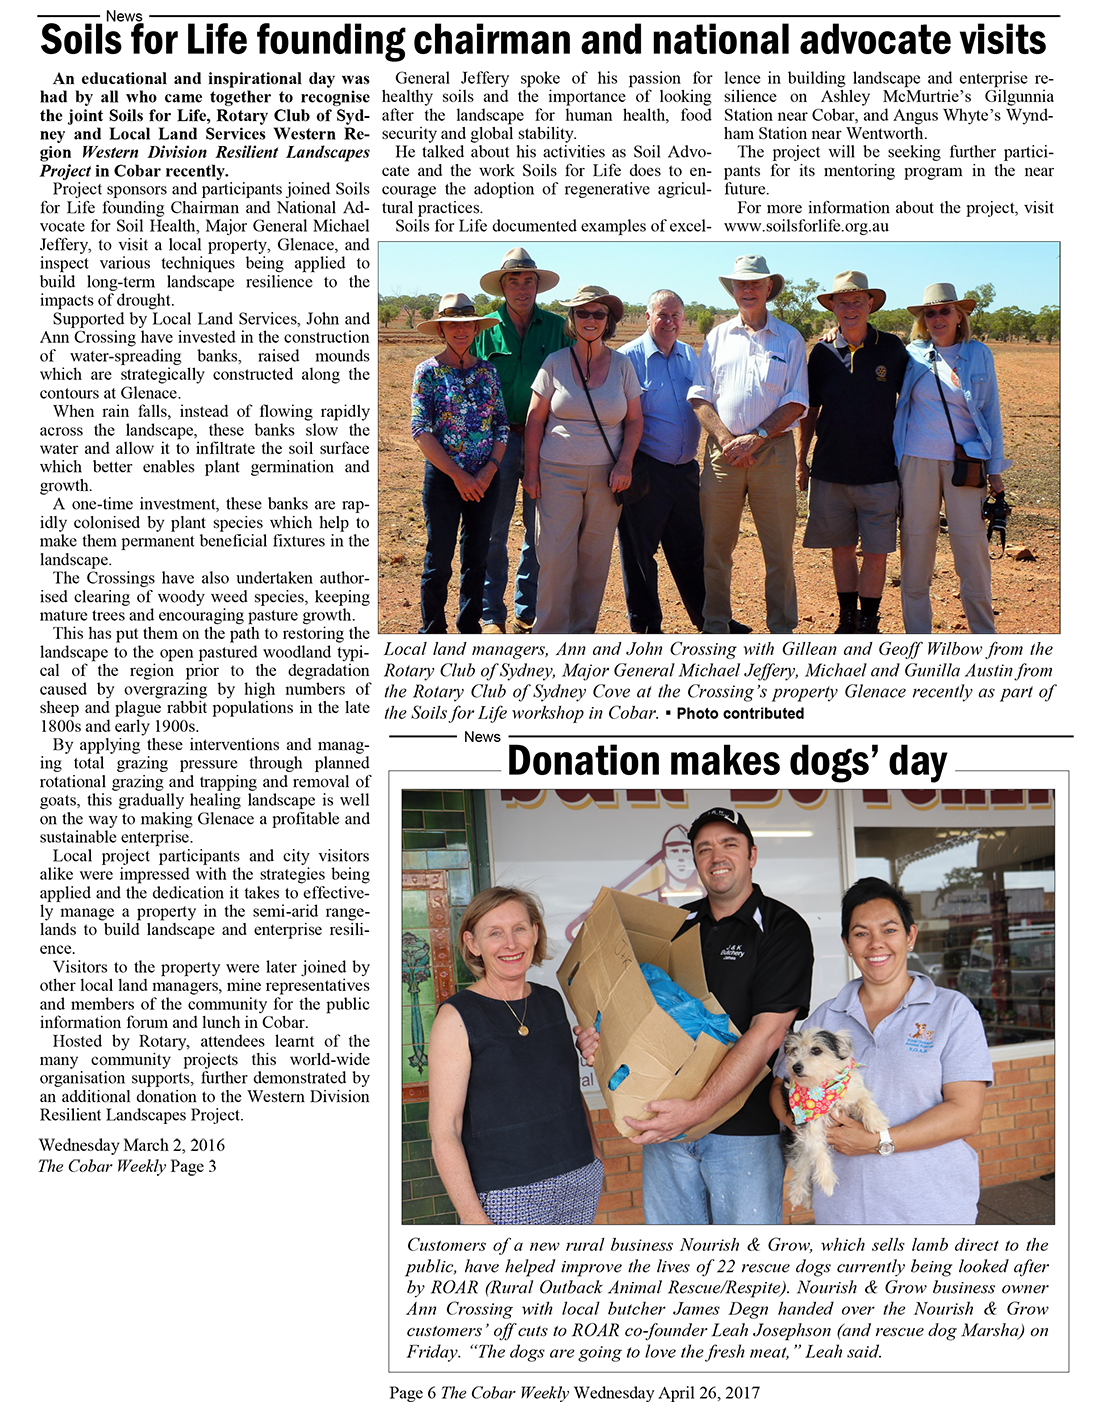 Cobar Weekly local business Nourish and Grow